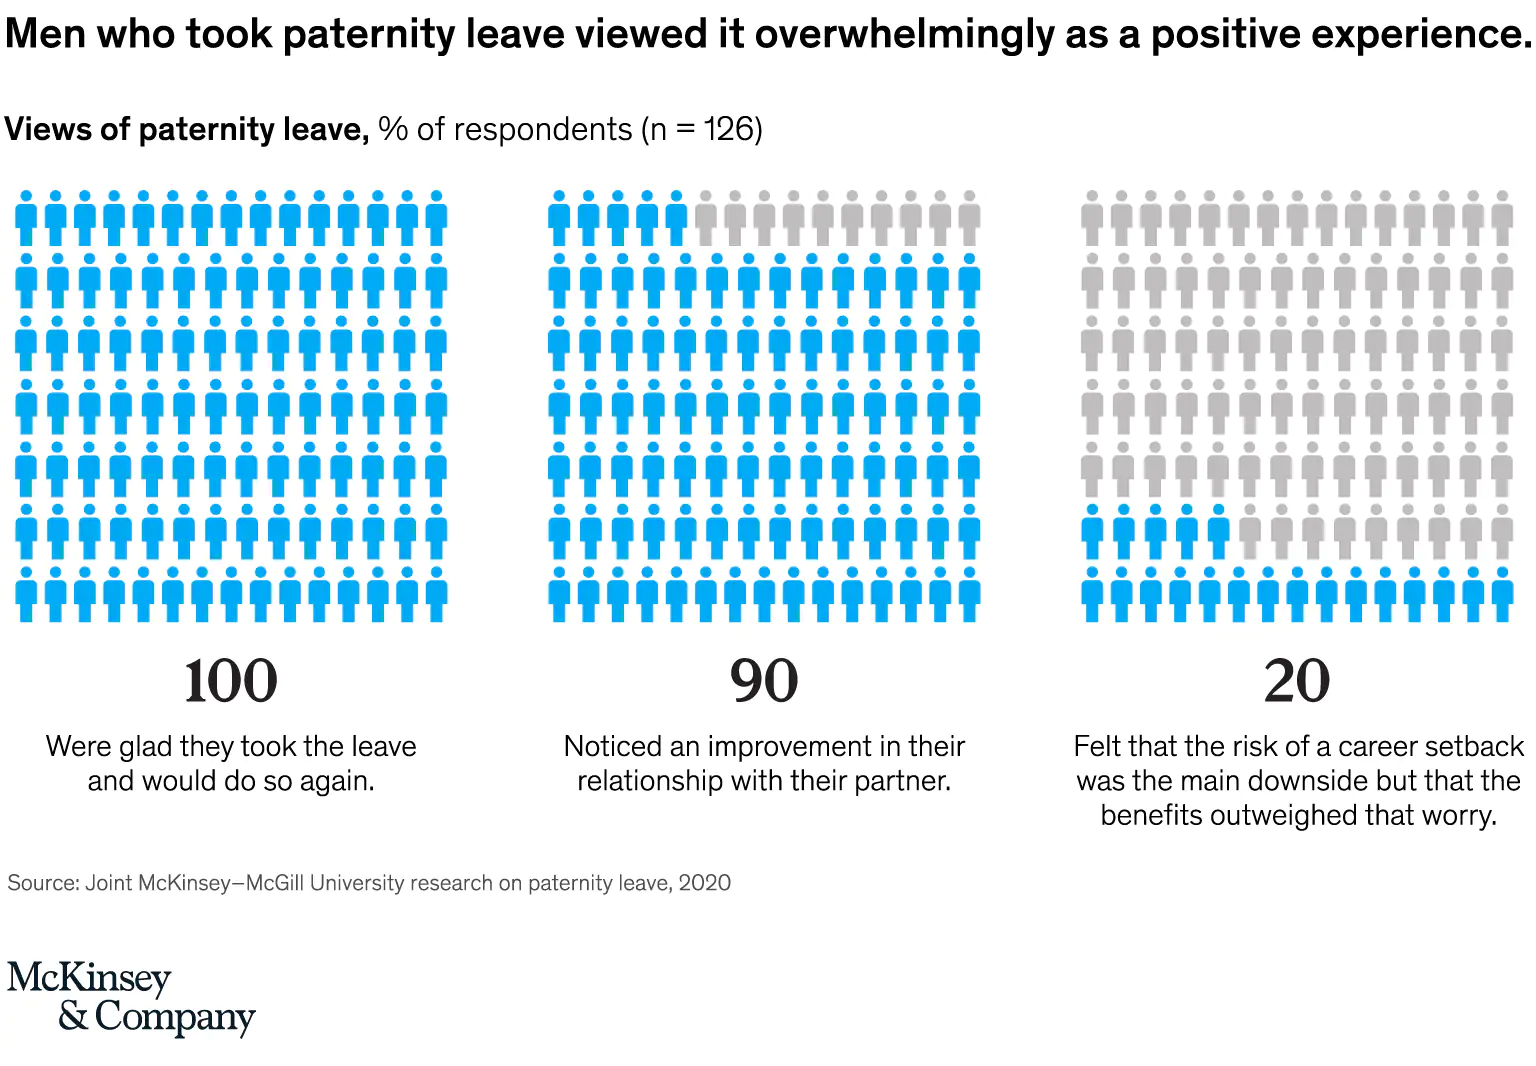 Infographic from McKinsey & Company detailing the percentage of men who found positive results from taking paternity leave. 